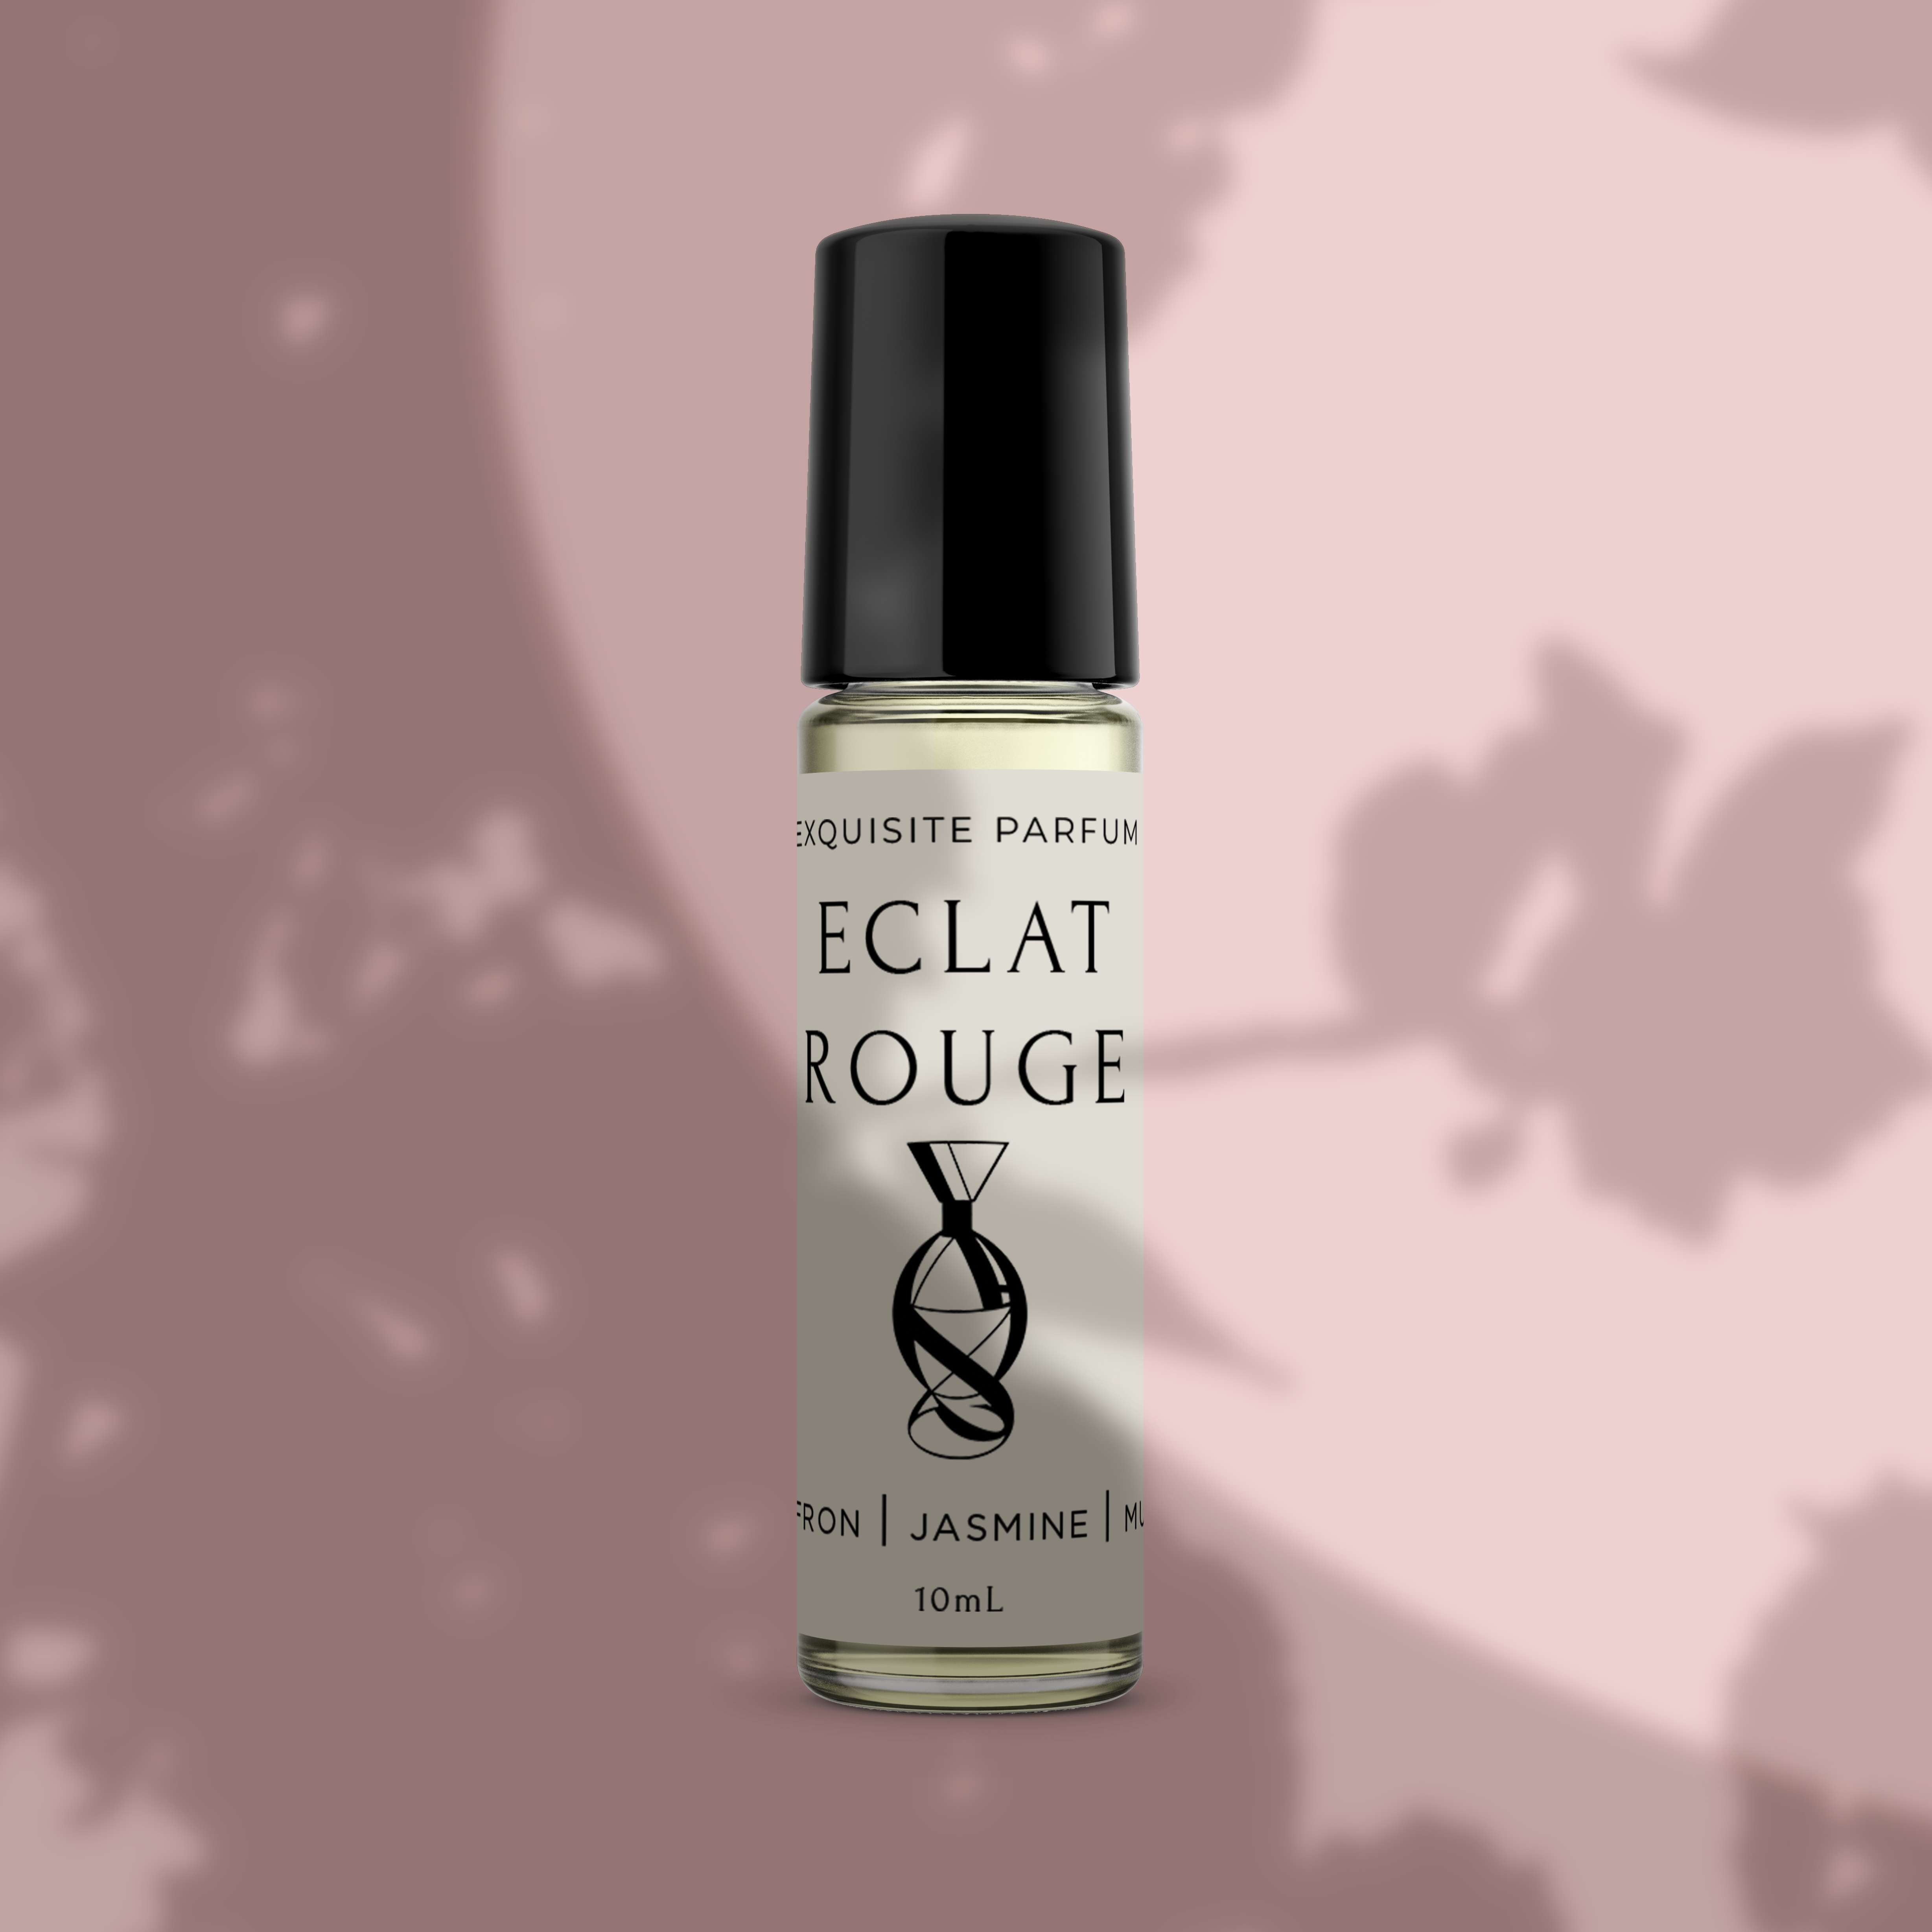 ECLAT ROUGE LUXURY PERFUME BODY OIL -Inspired by Baccarat Rouge 540